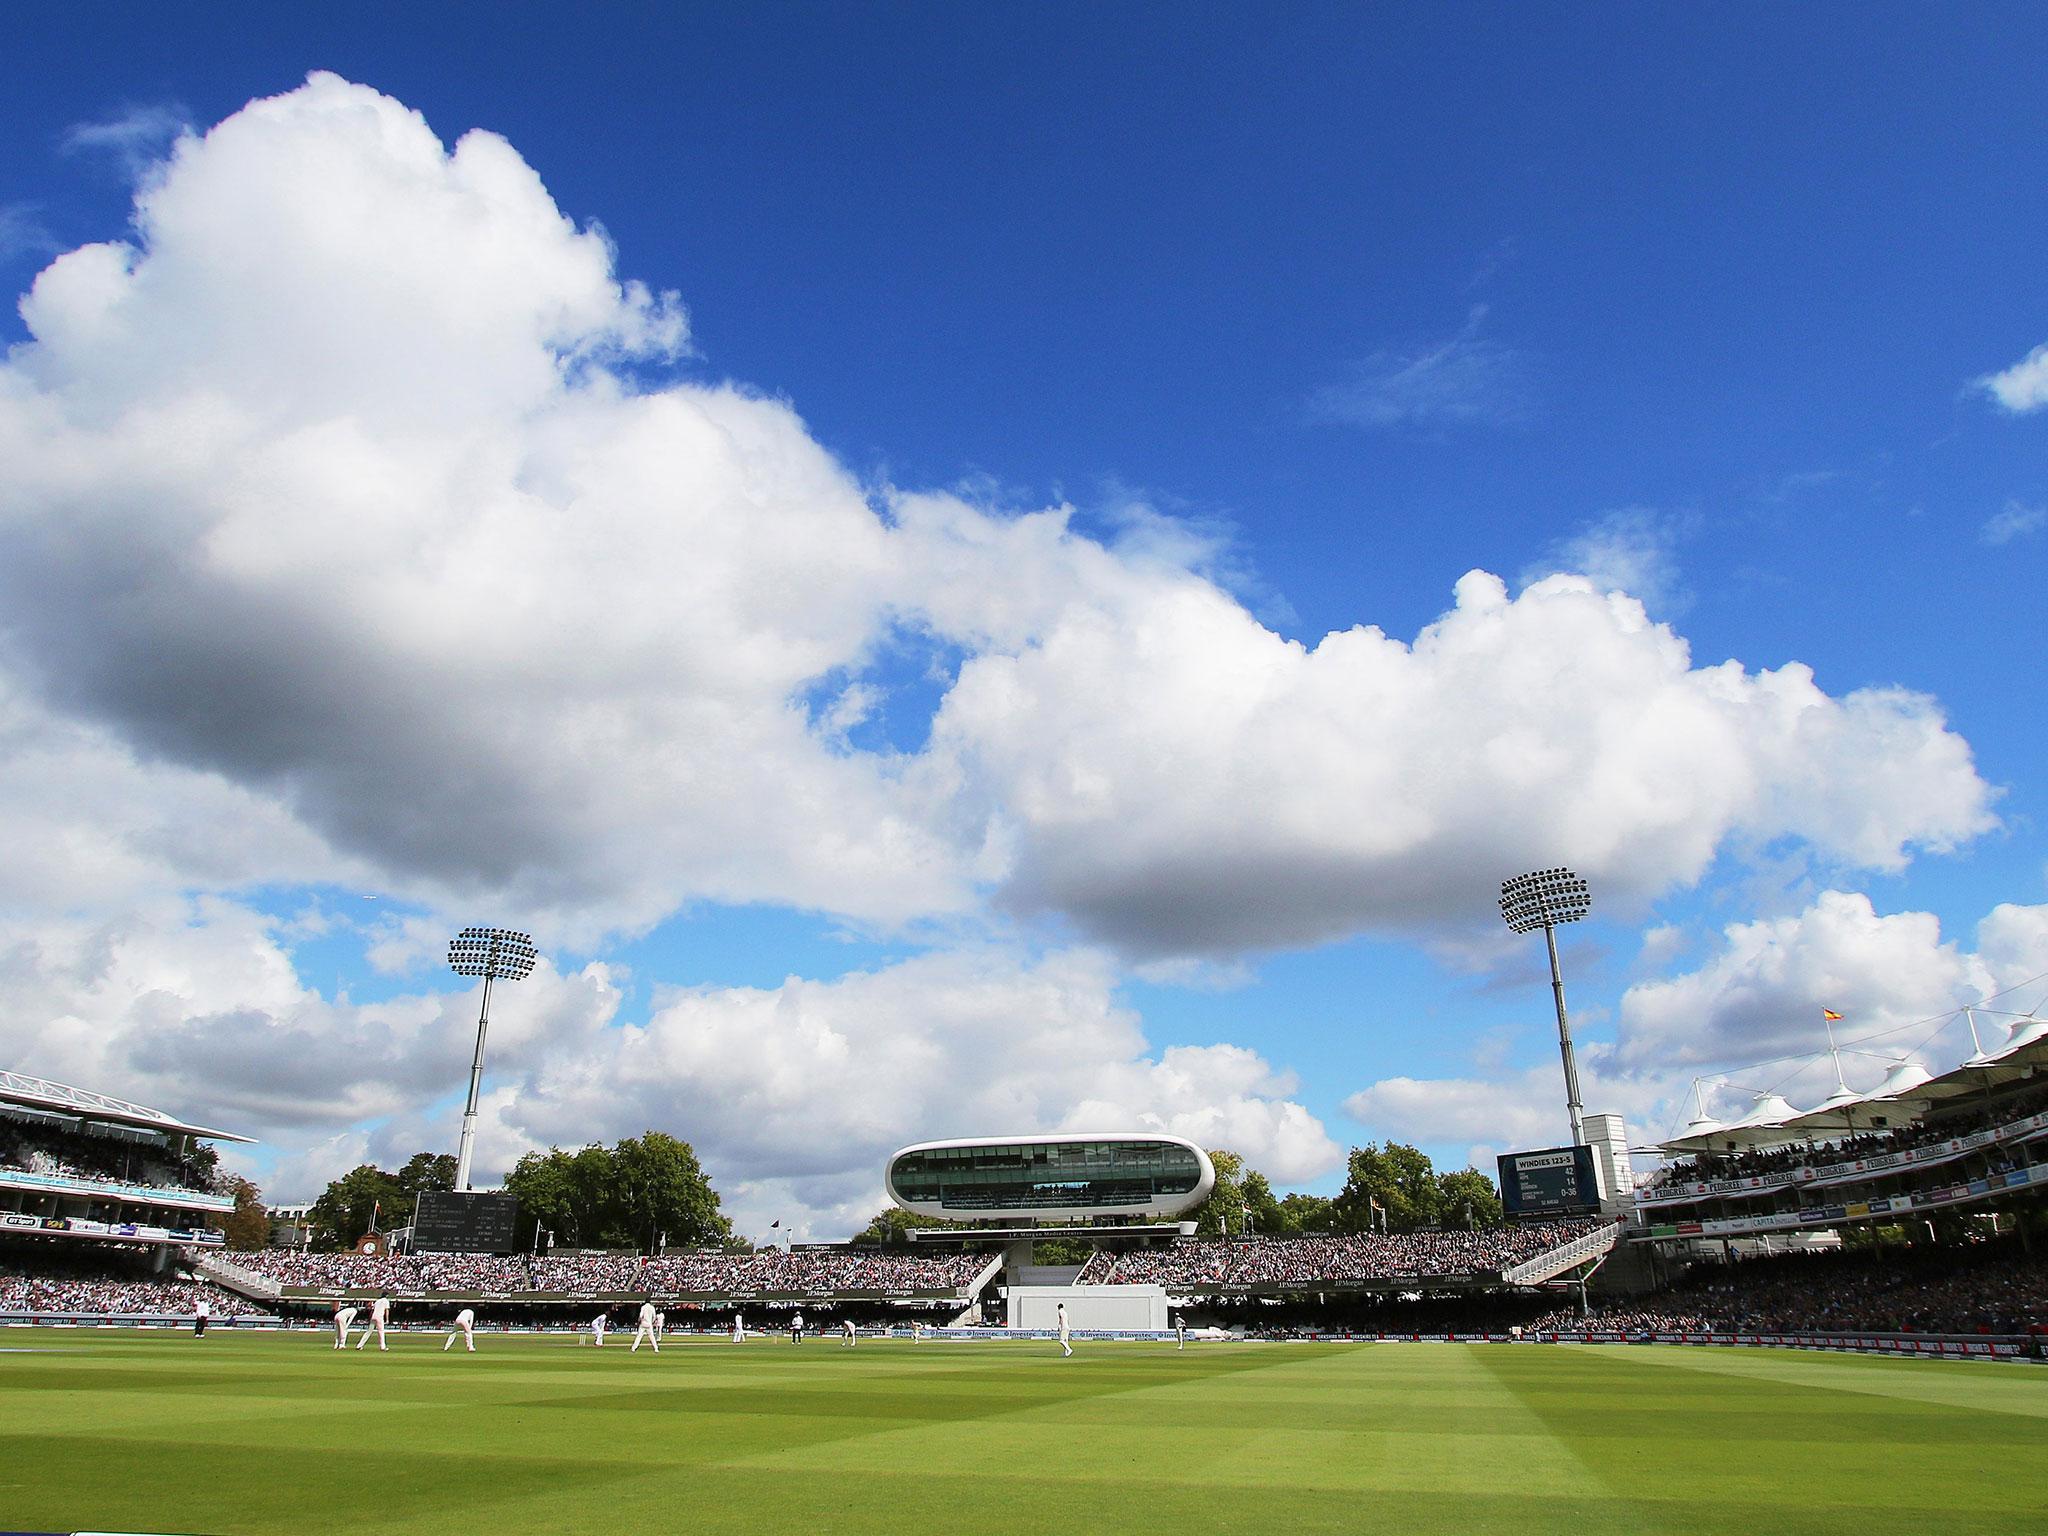 &#13;
Lord's has retained its two Tests per summer &#13;